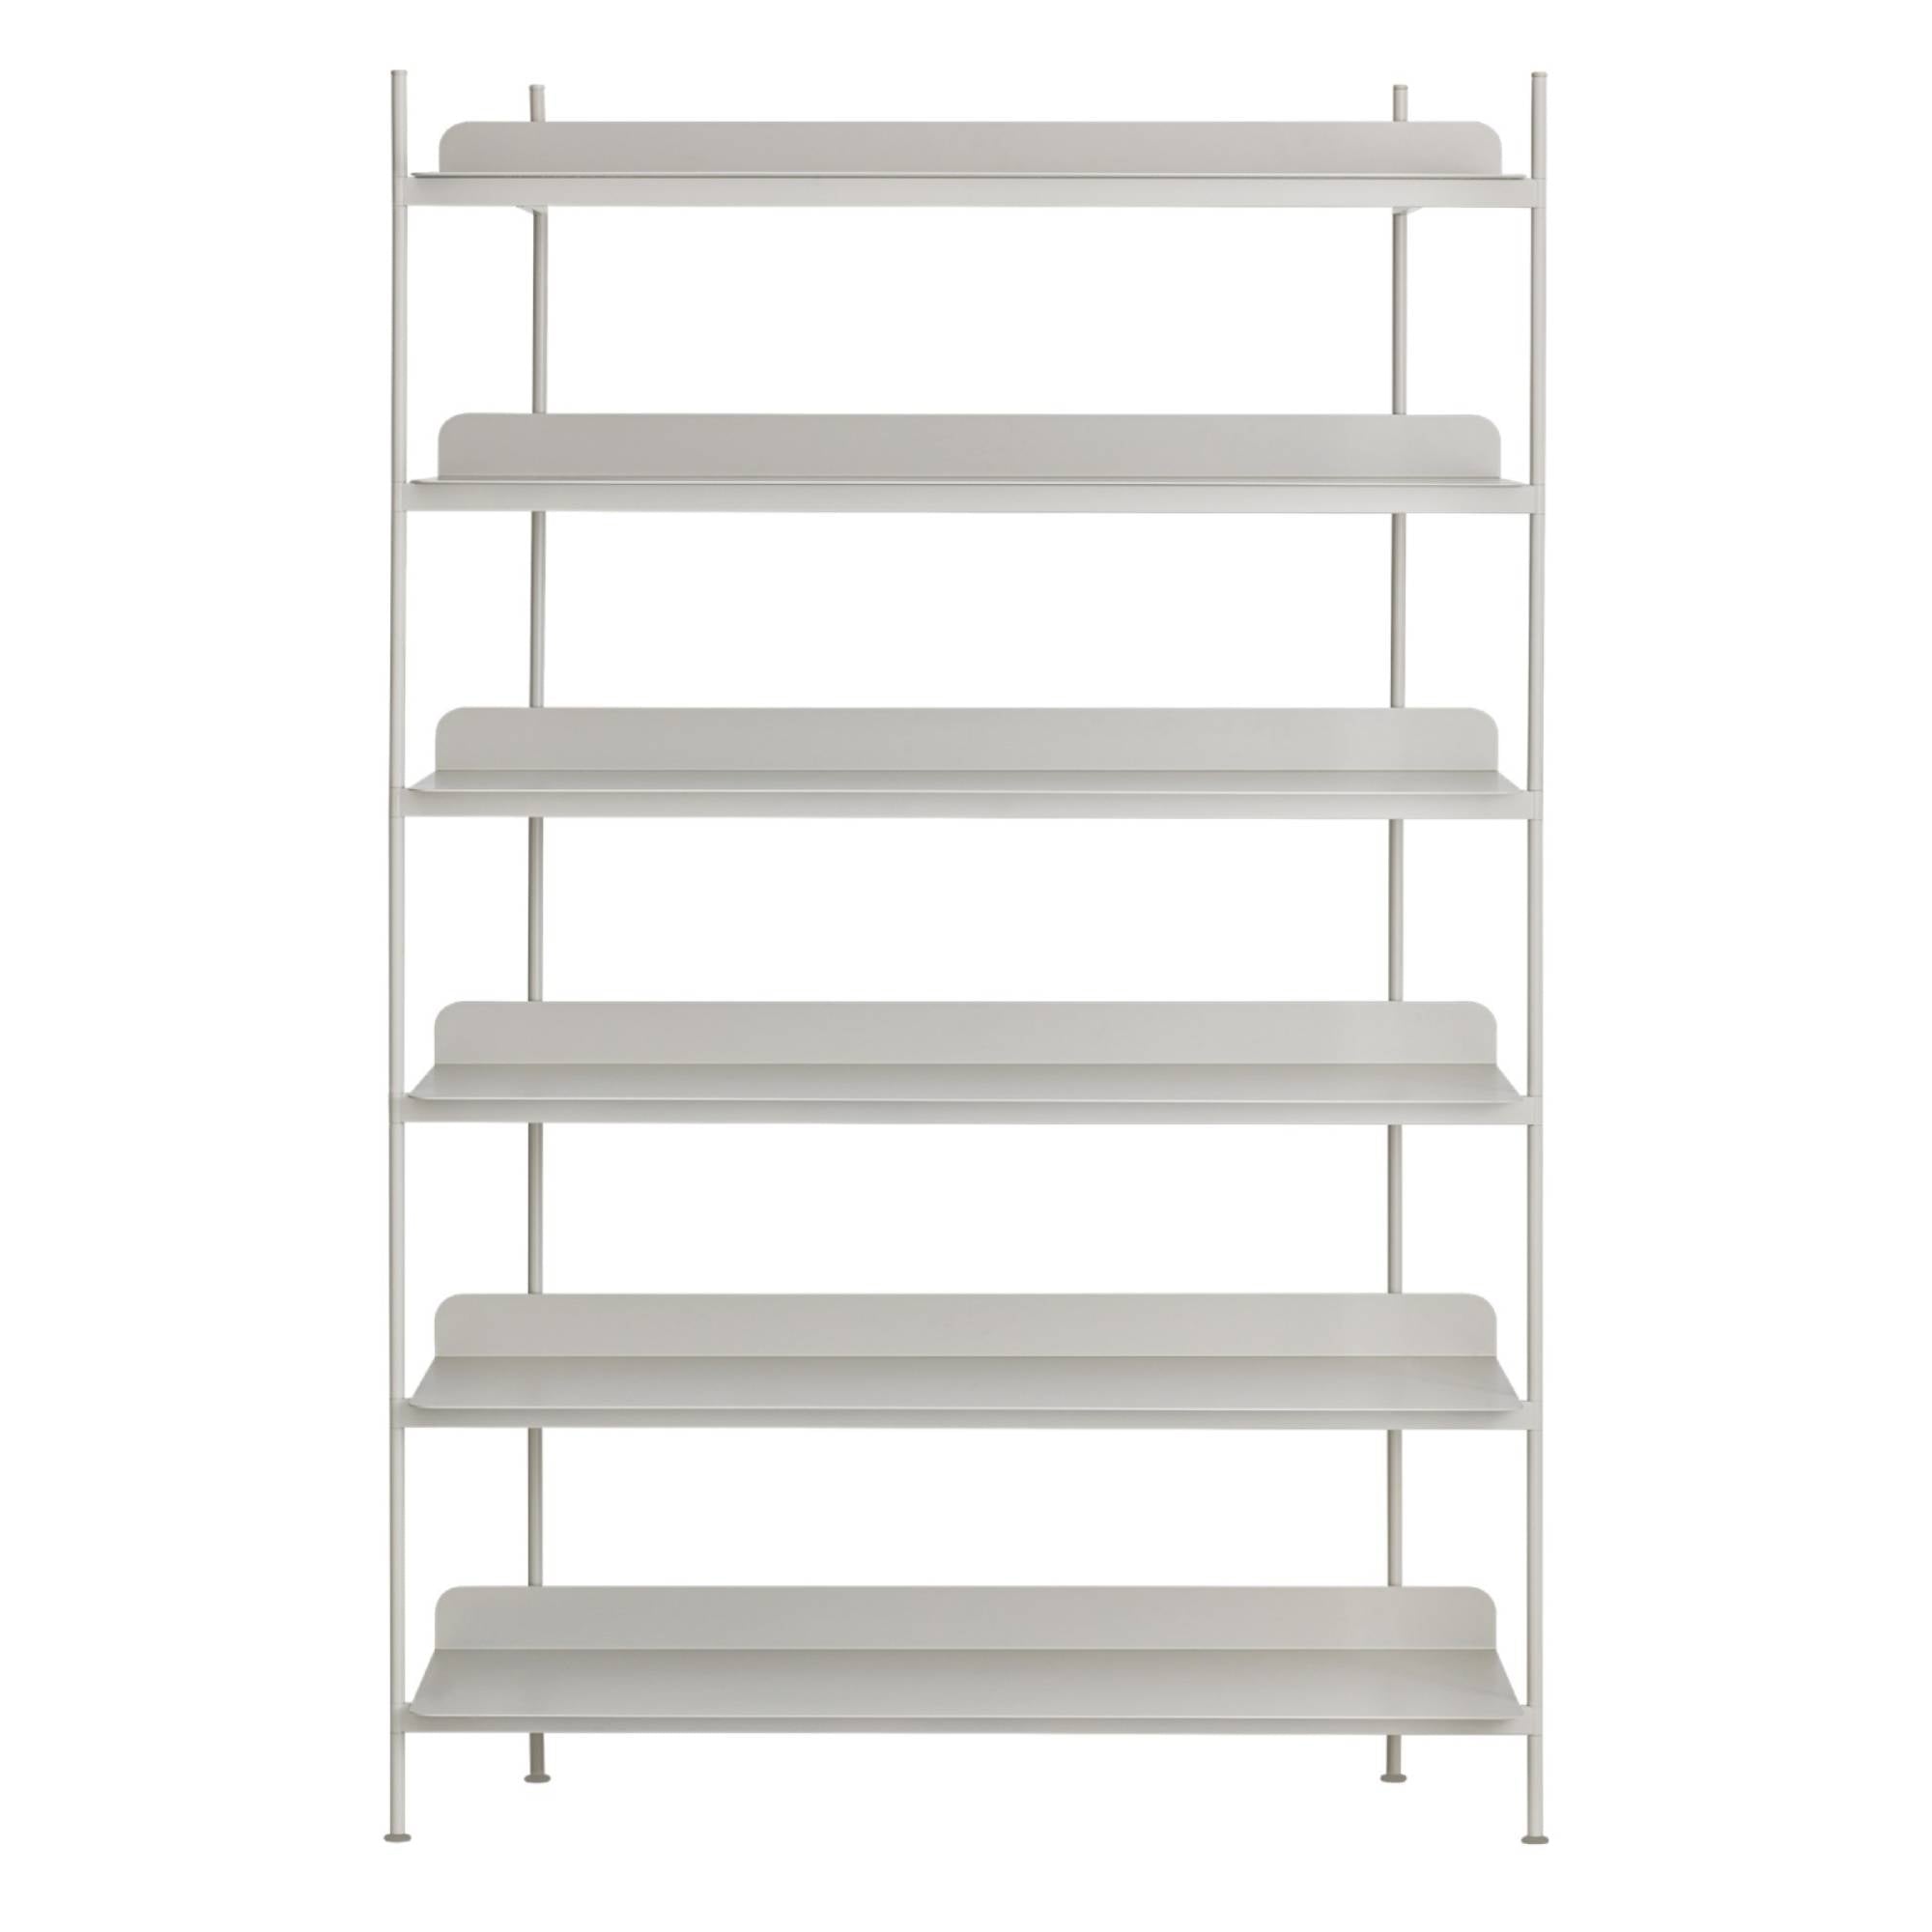 Compile Shelving System: Configuration 4 + Grey